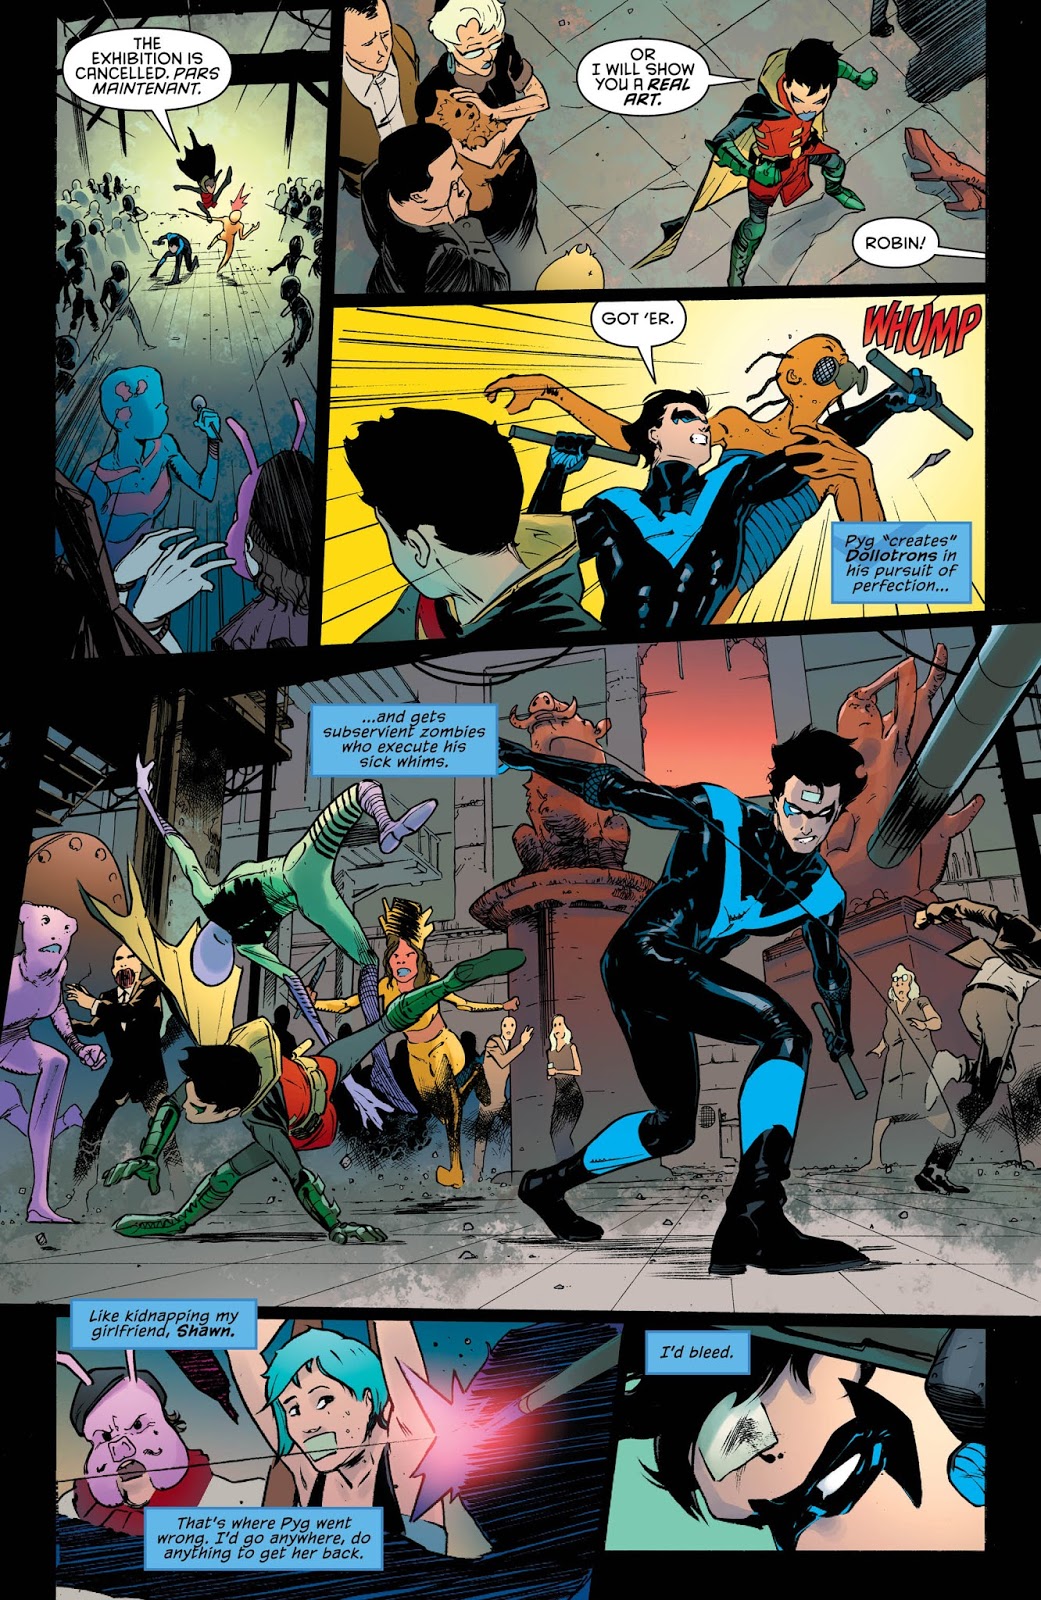 Weird Science DC Comics: Nightwing #18 Review and *SPOILERS*